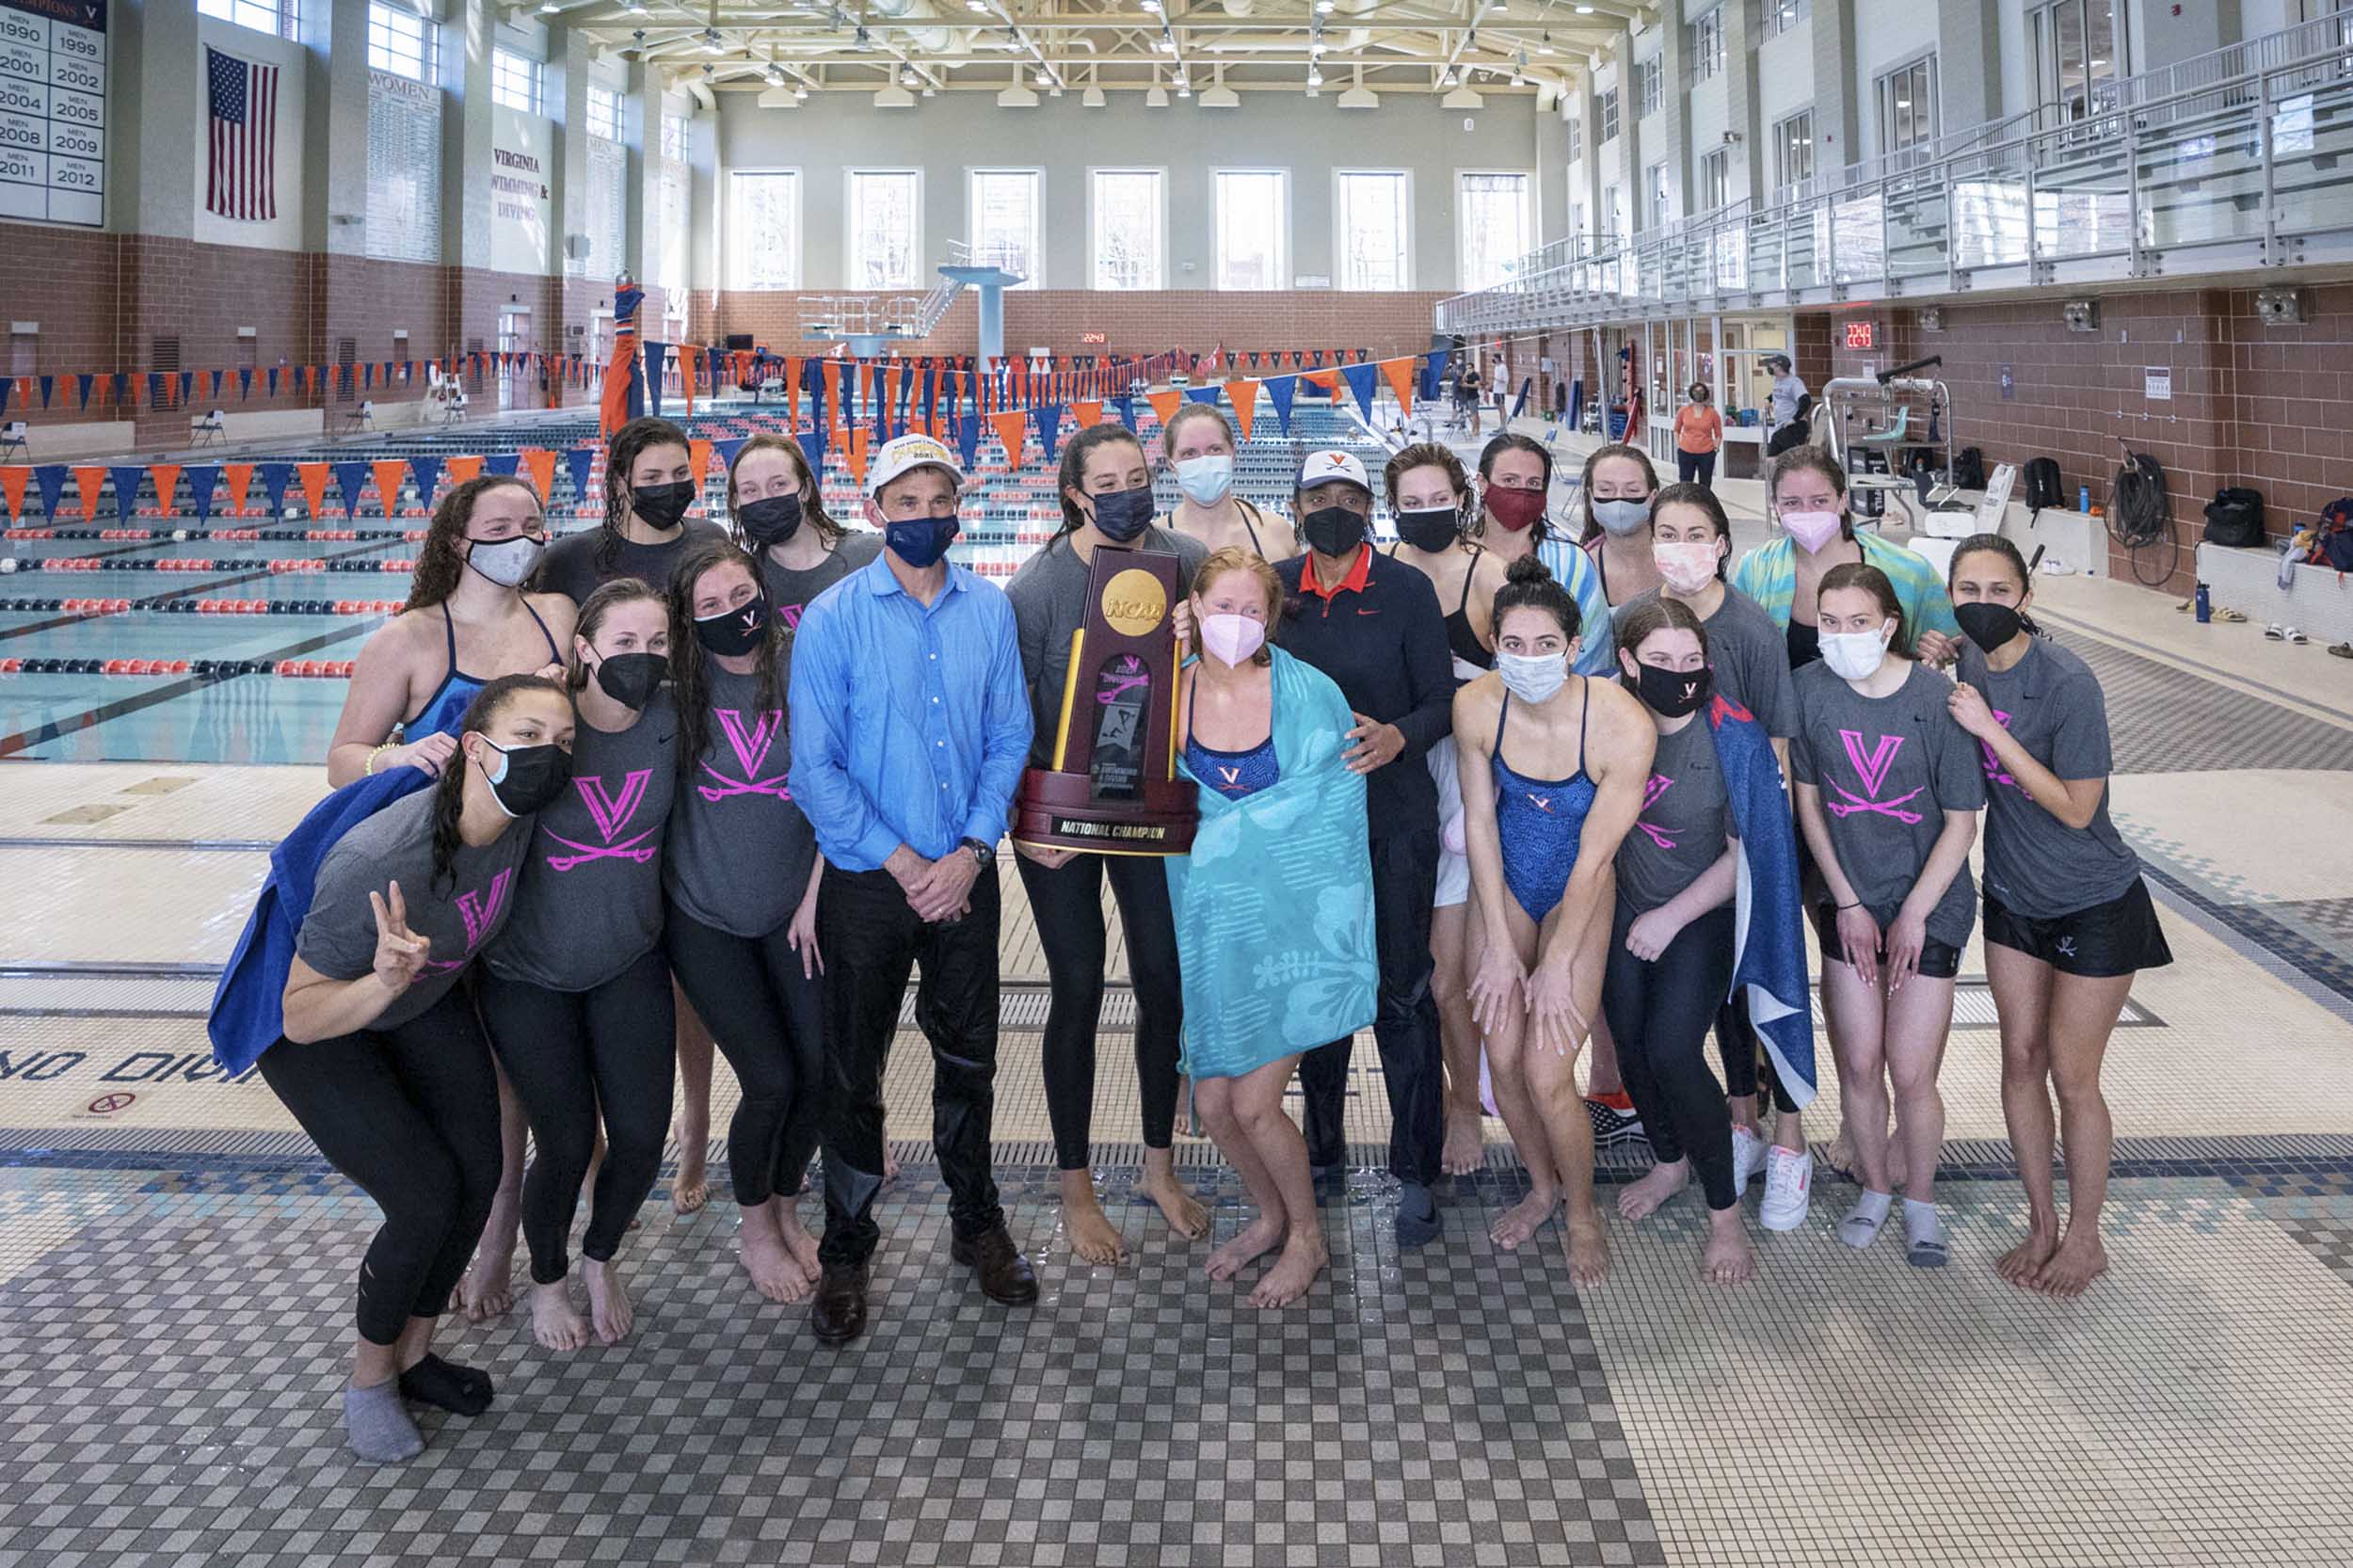 Swimm team gathered together holding their ACC Trophy with President Jim Ryan